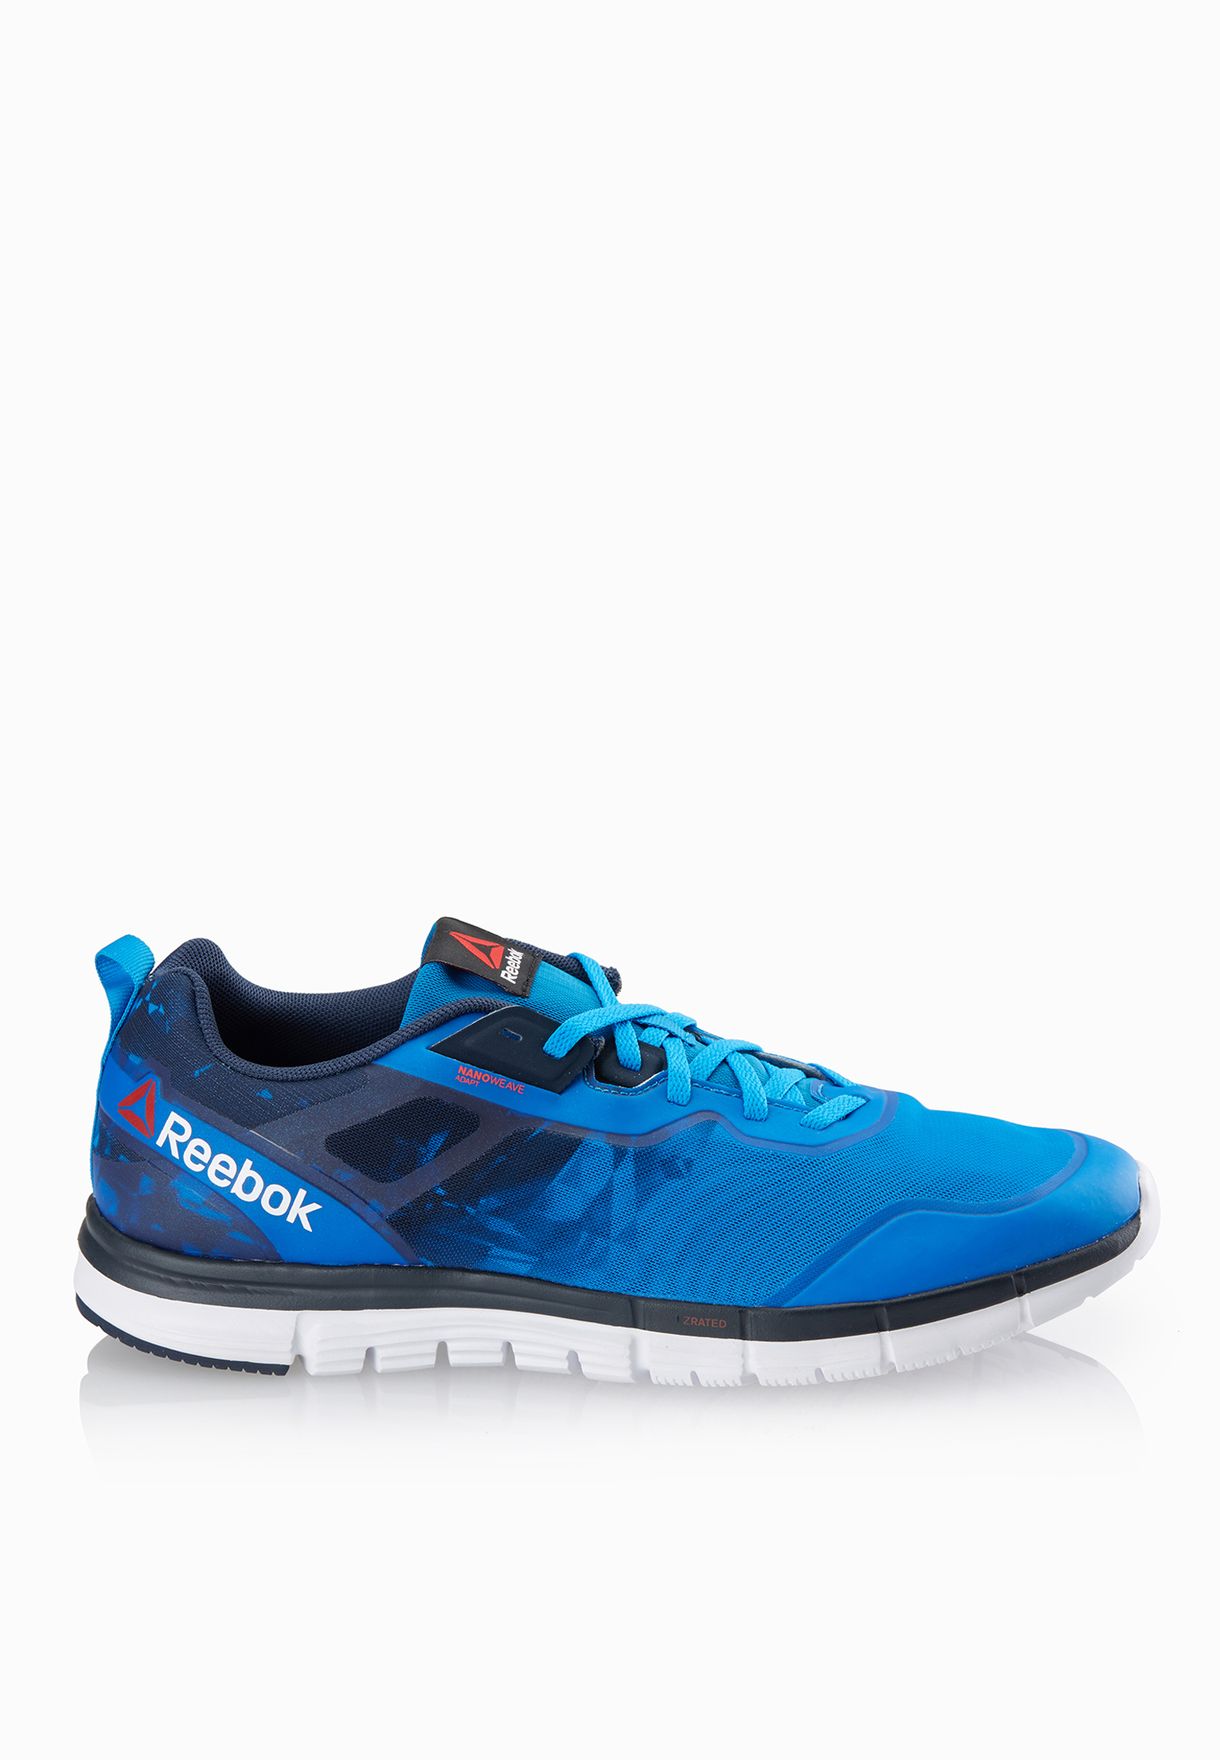 reebok zquick tempo ghost running shoes 